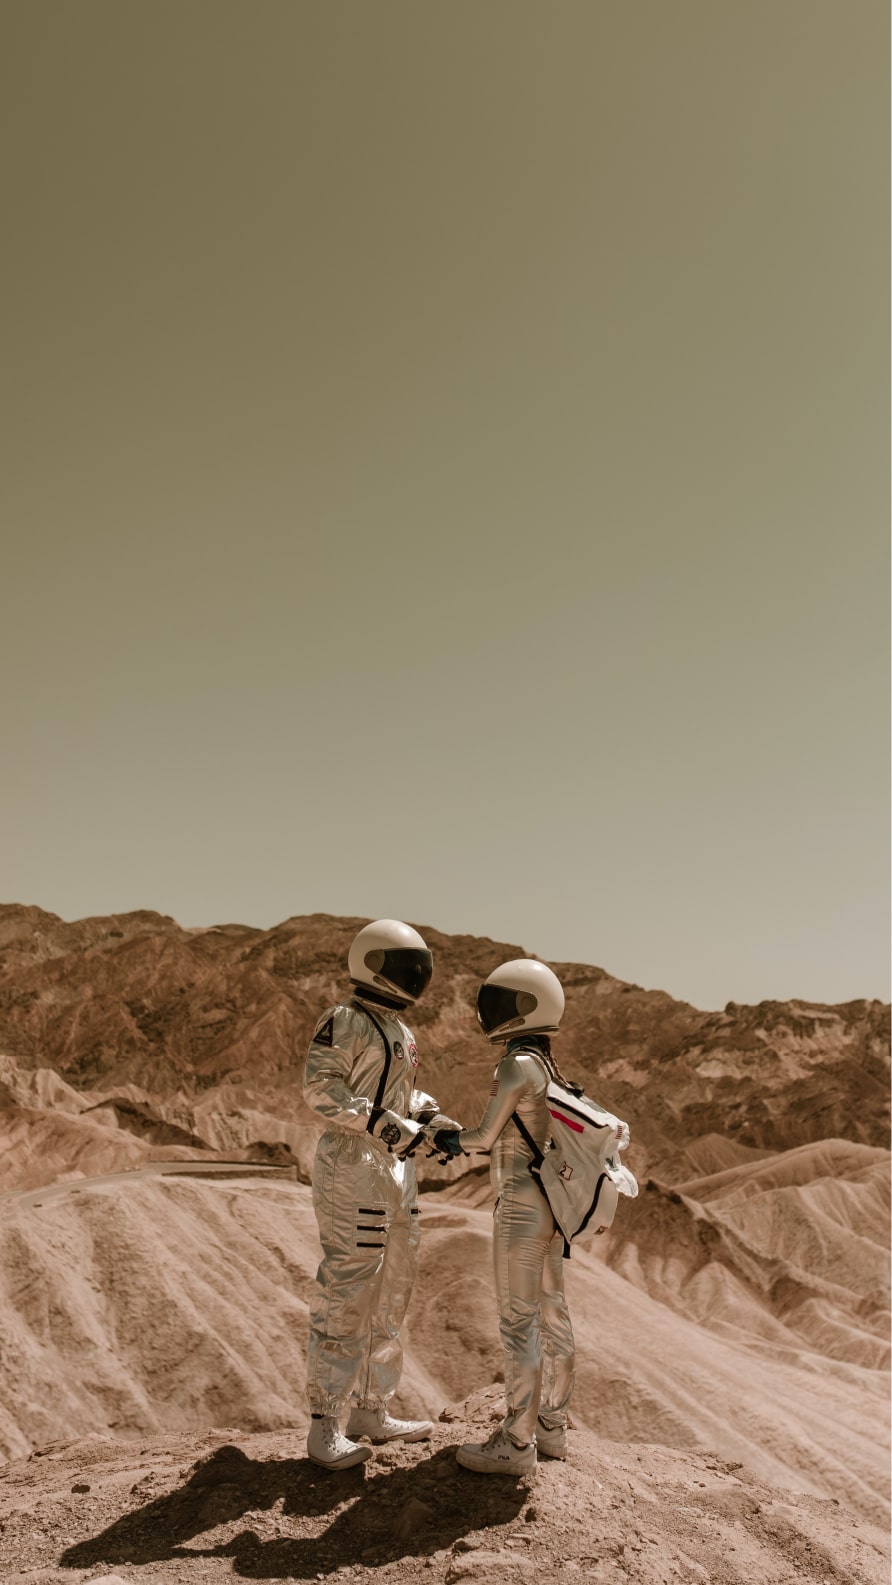 iPhone wallpapers featuring astronauts